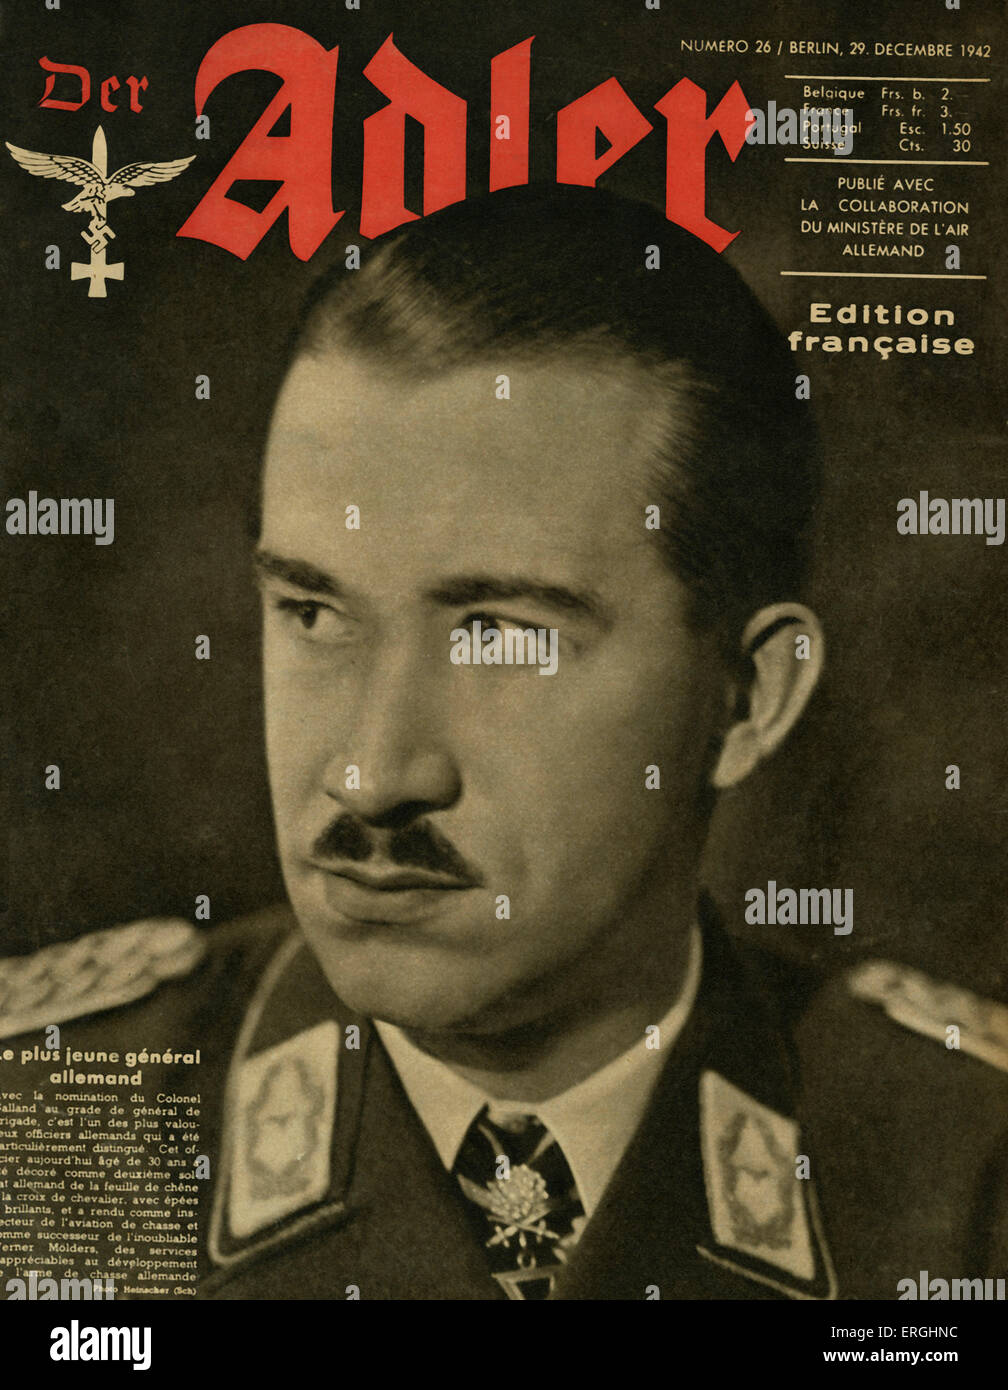 Der Adler, magazine of the German Air Force (Luftwaffe) during World War 2.  Cover of 29 December 1942. French edition. Showing Stock Photo